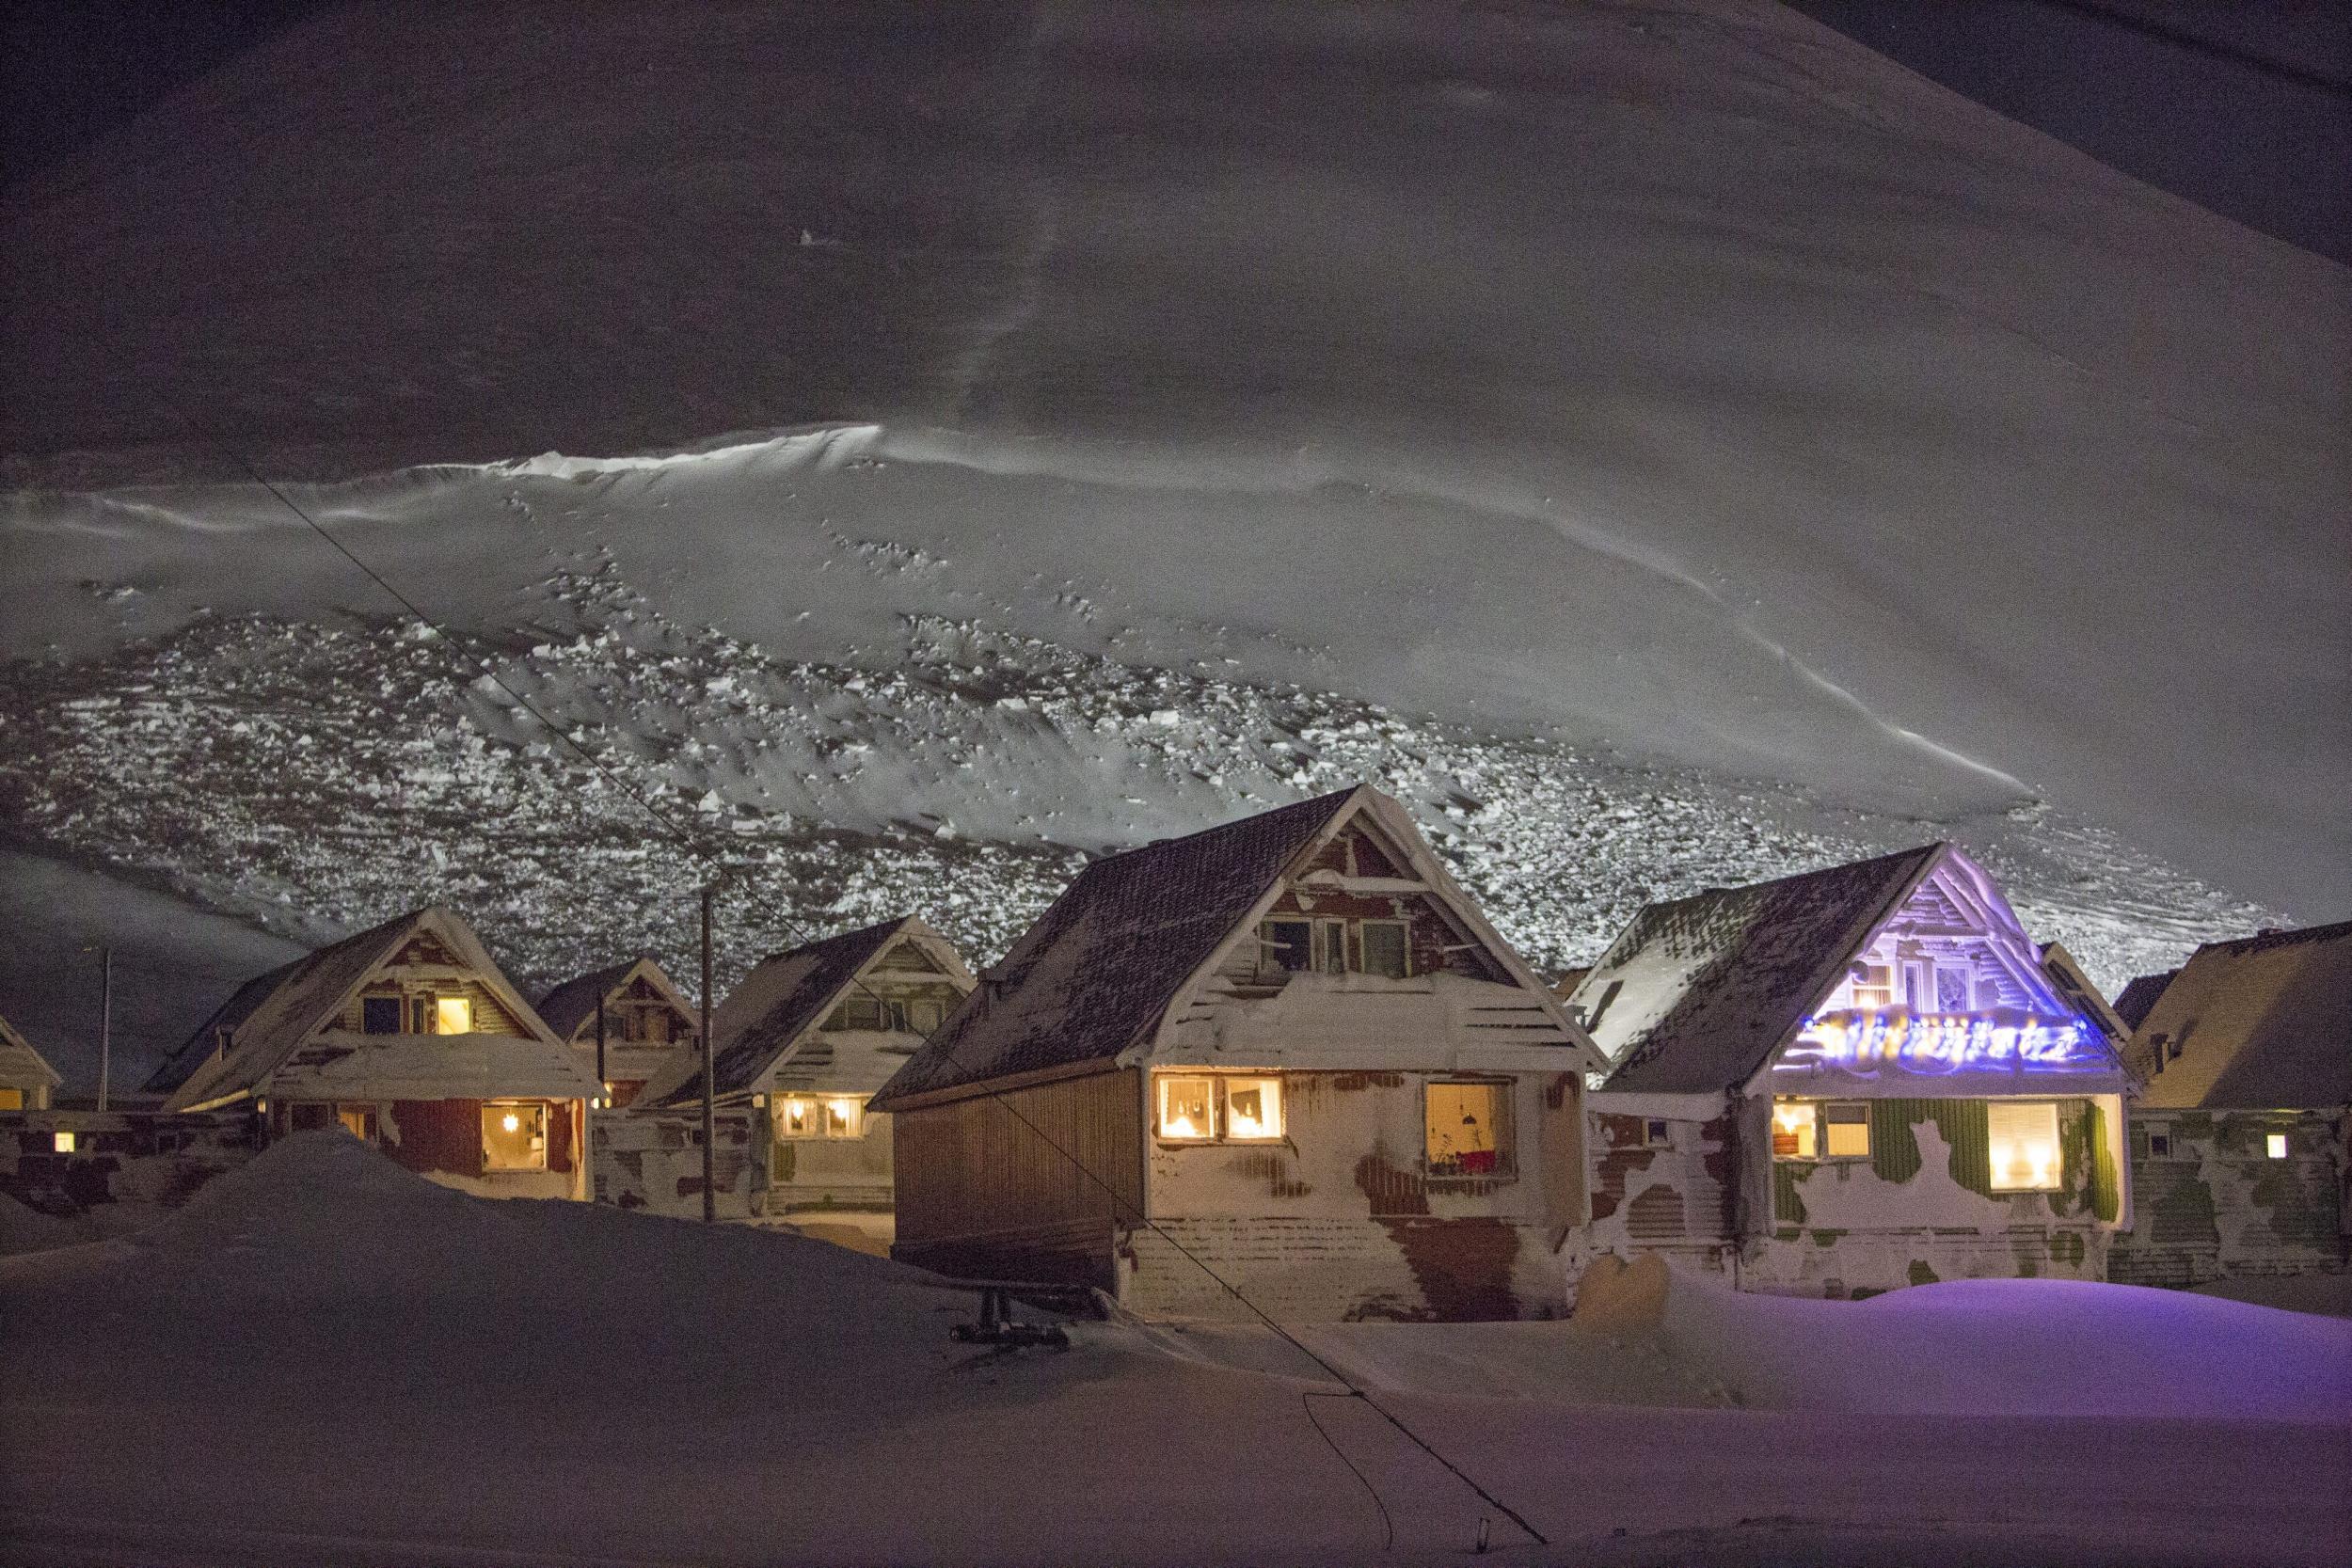 The houses hit by the avalanche